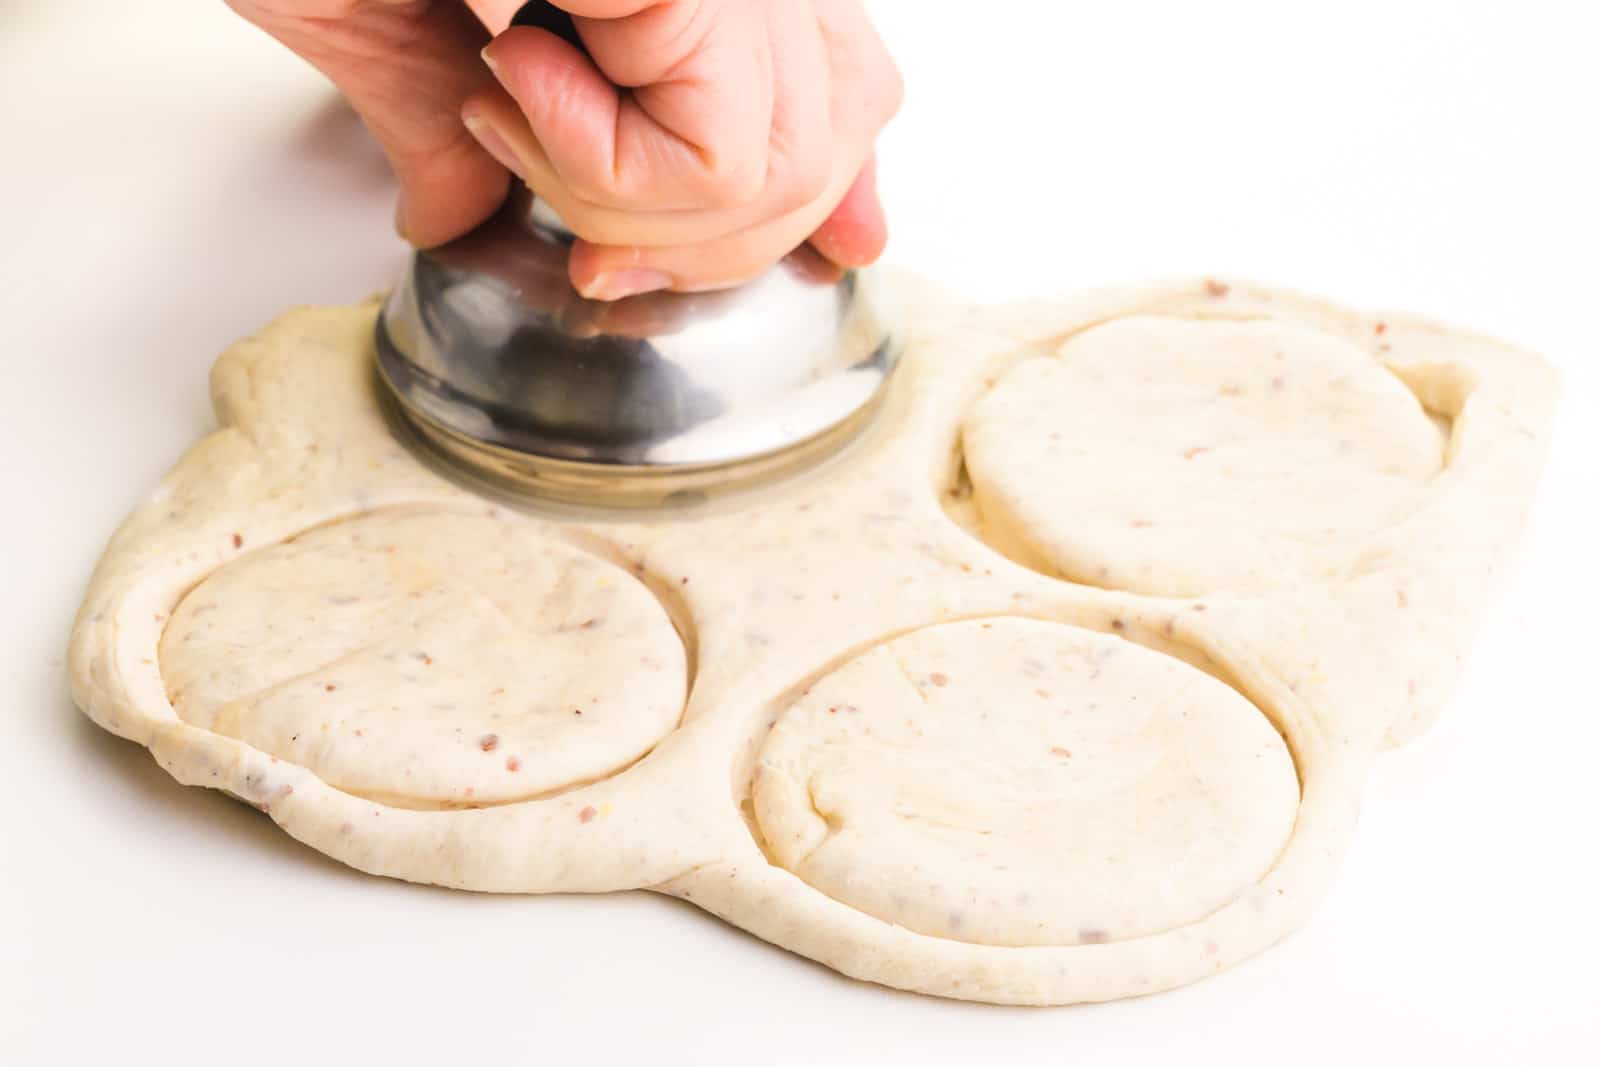 A hand holds a metal object cutting 3-inch rounds in dough.